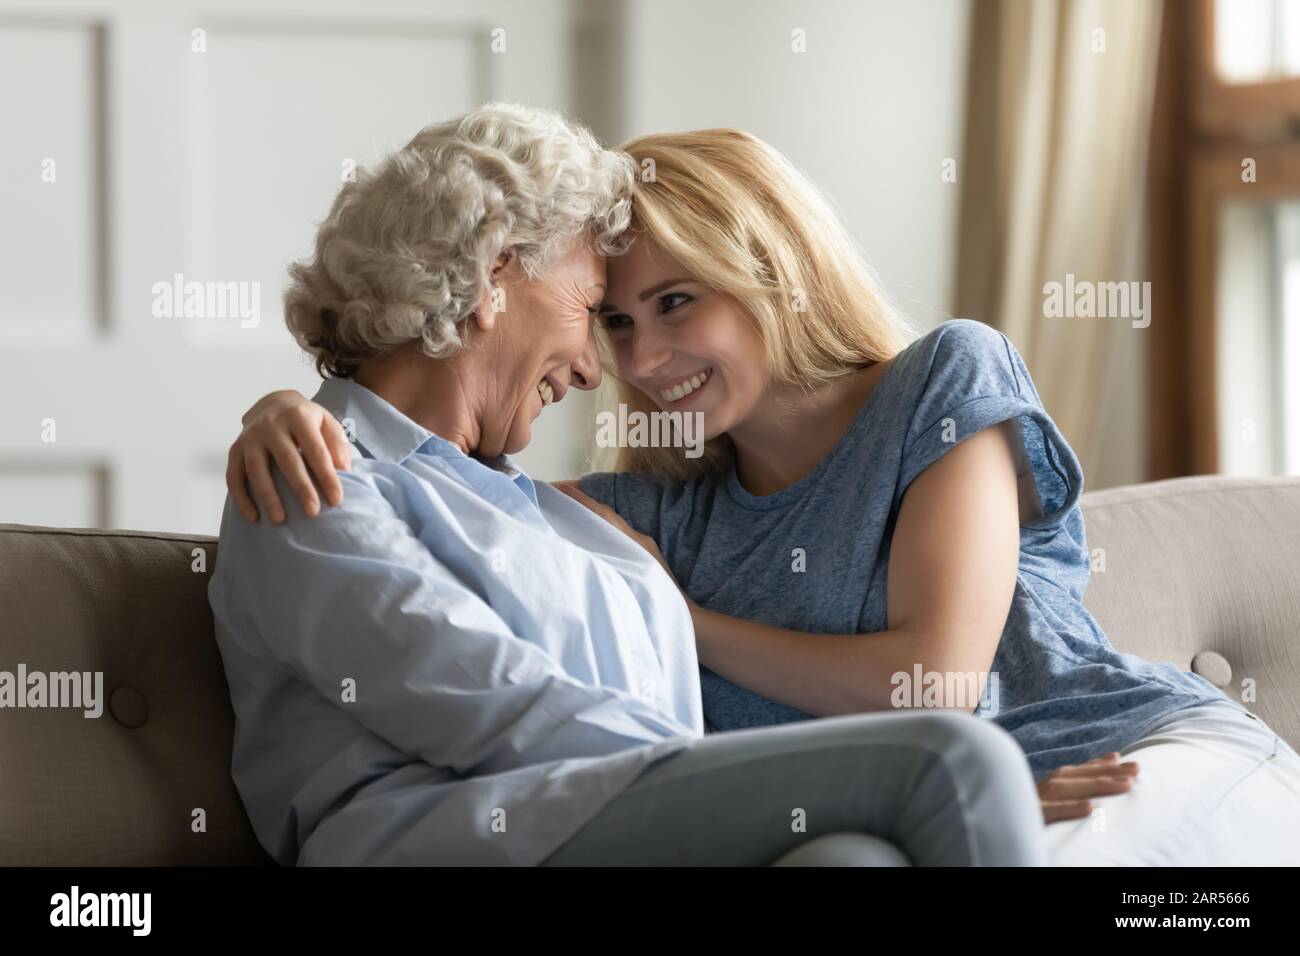 Loving young lady enjoying sweet tender moment with older mother. Stock Photo